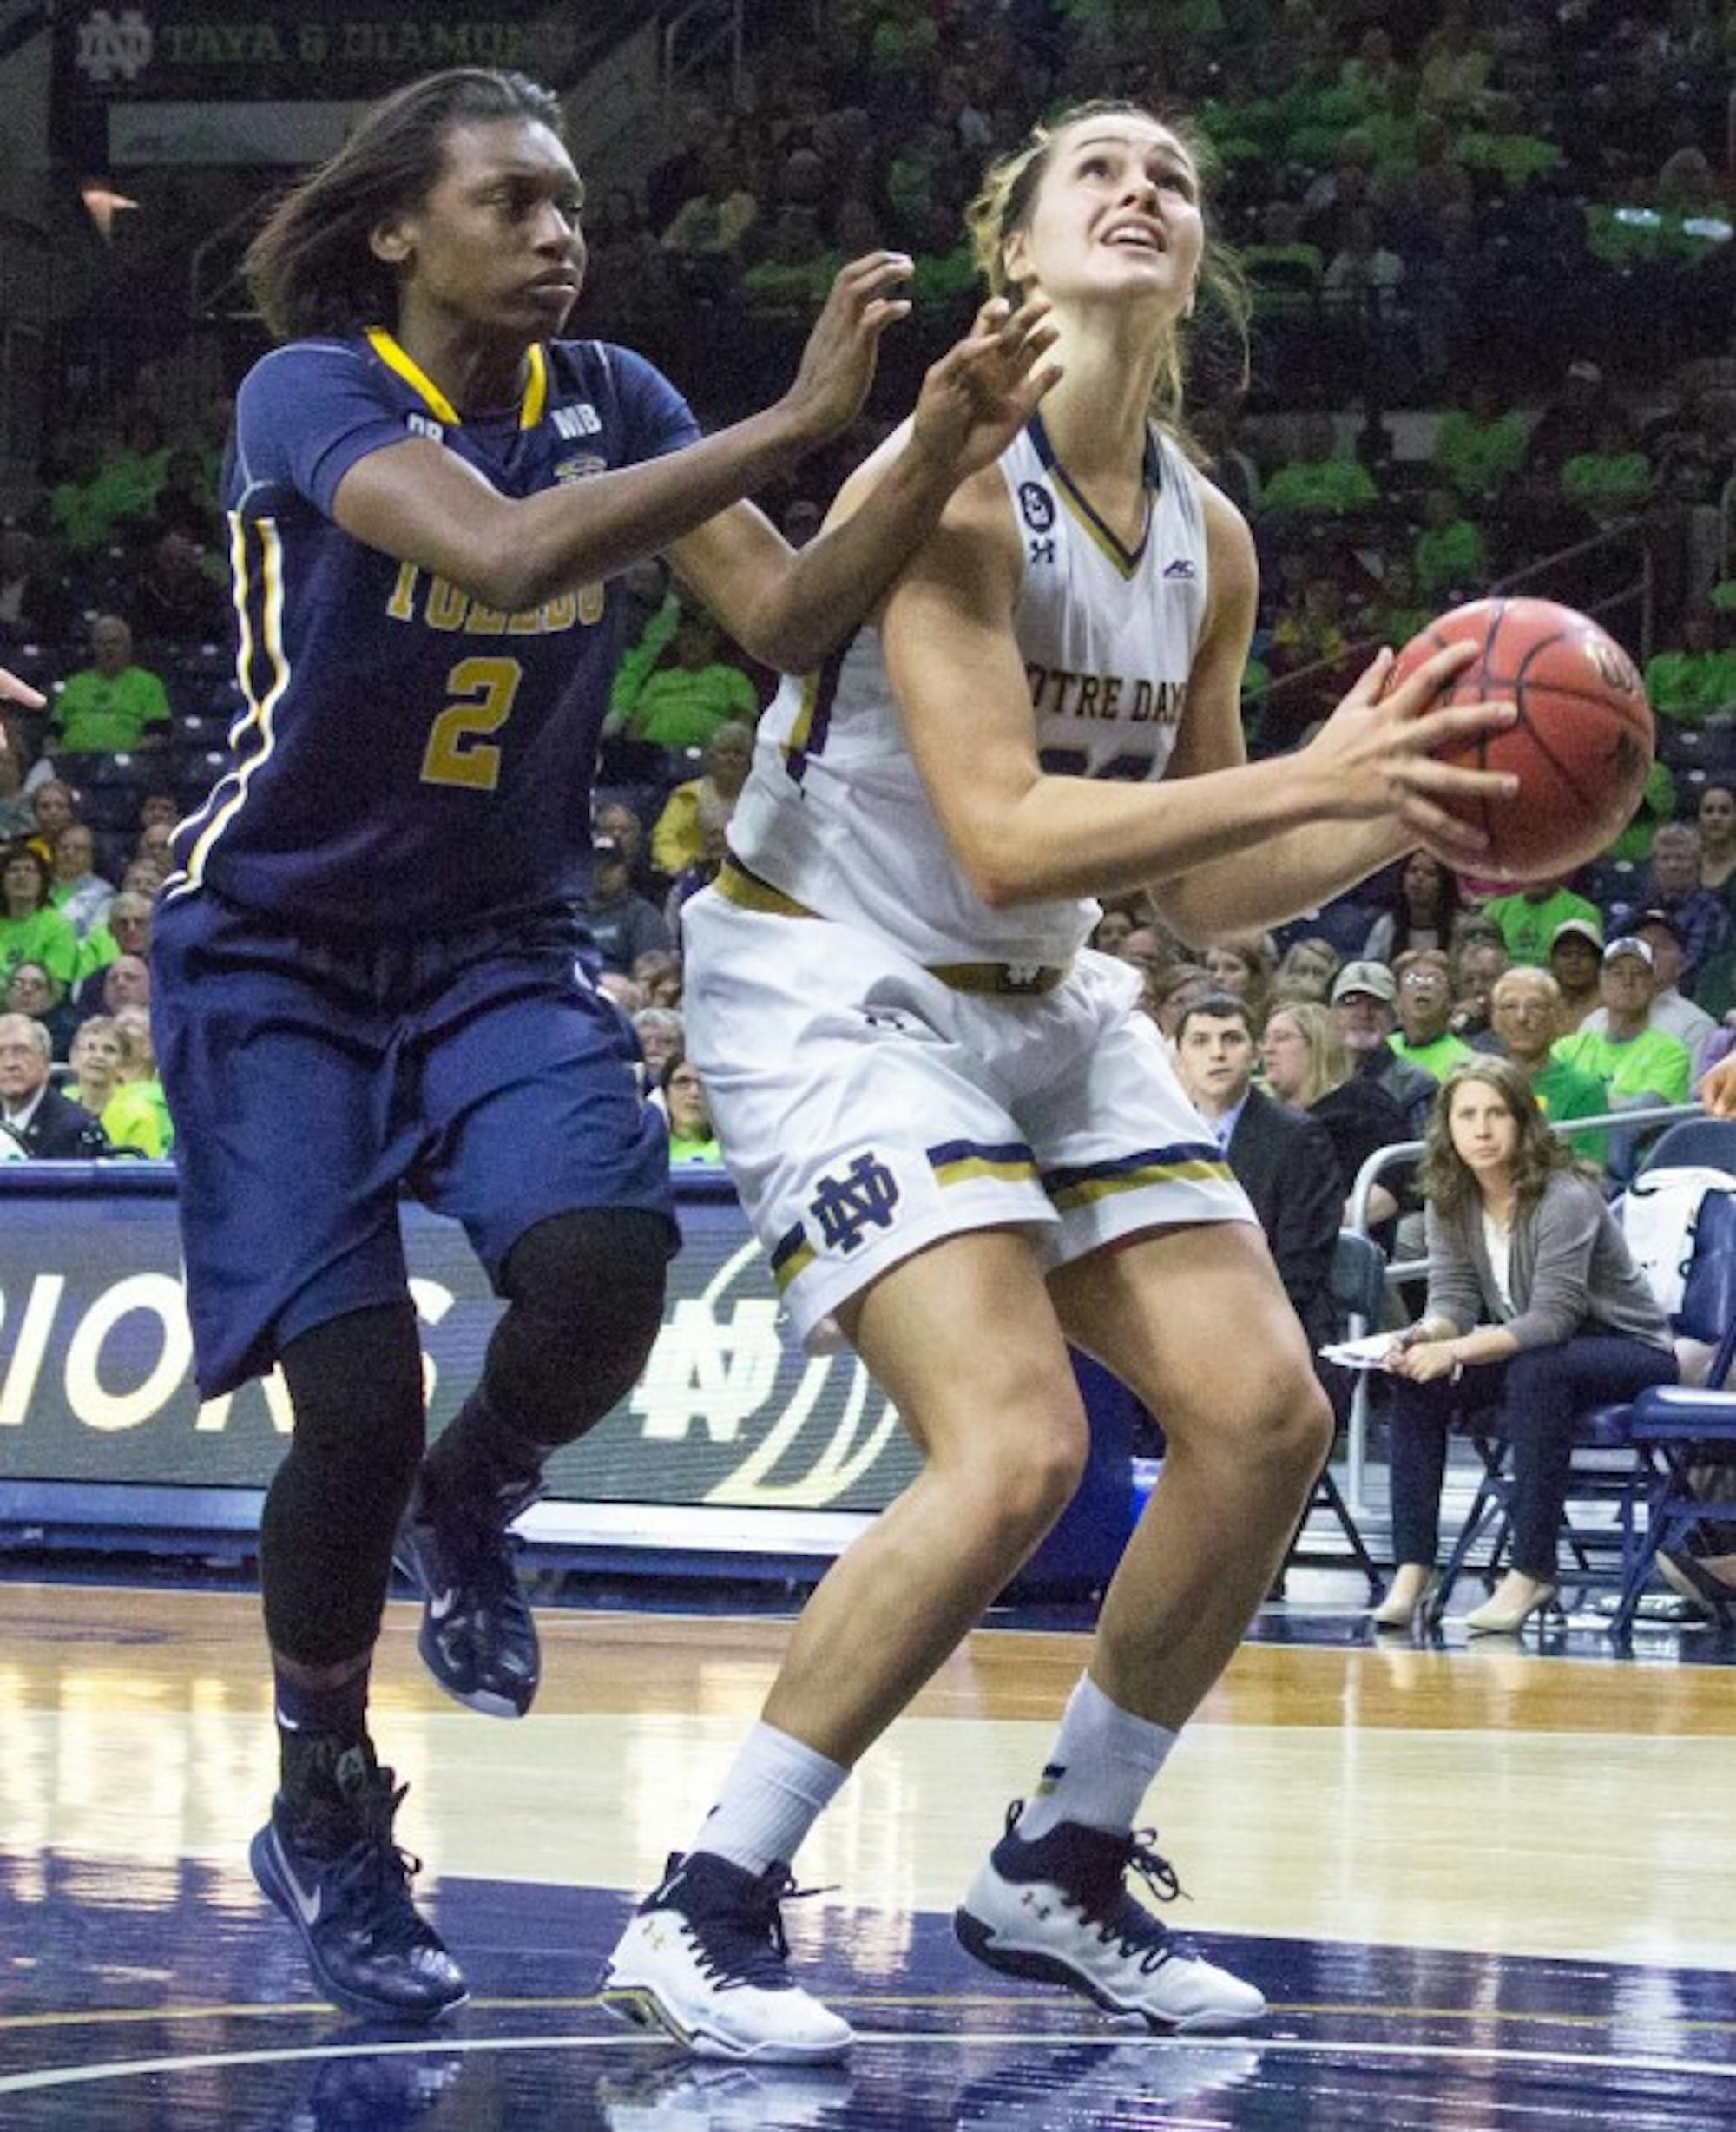 Irish sophomore forward Kathryn Westbeld looks toward the basket during Notre Dame's 4-39 win over Toledo at Purcell Pavilion on Nov. 18.